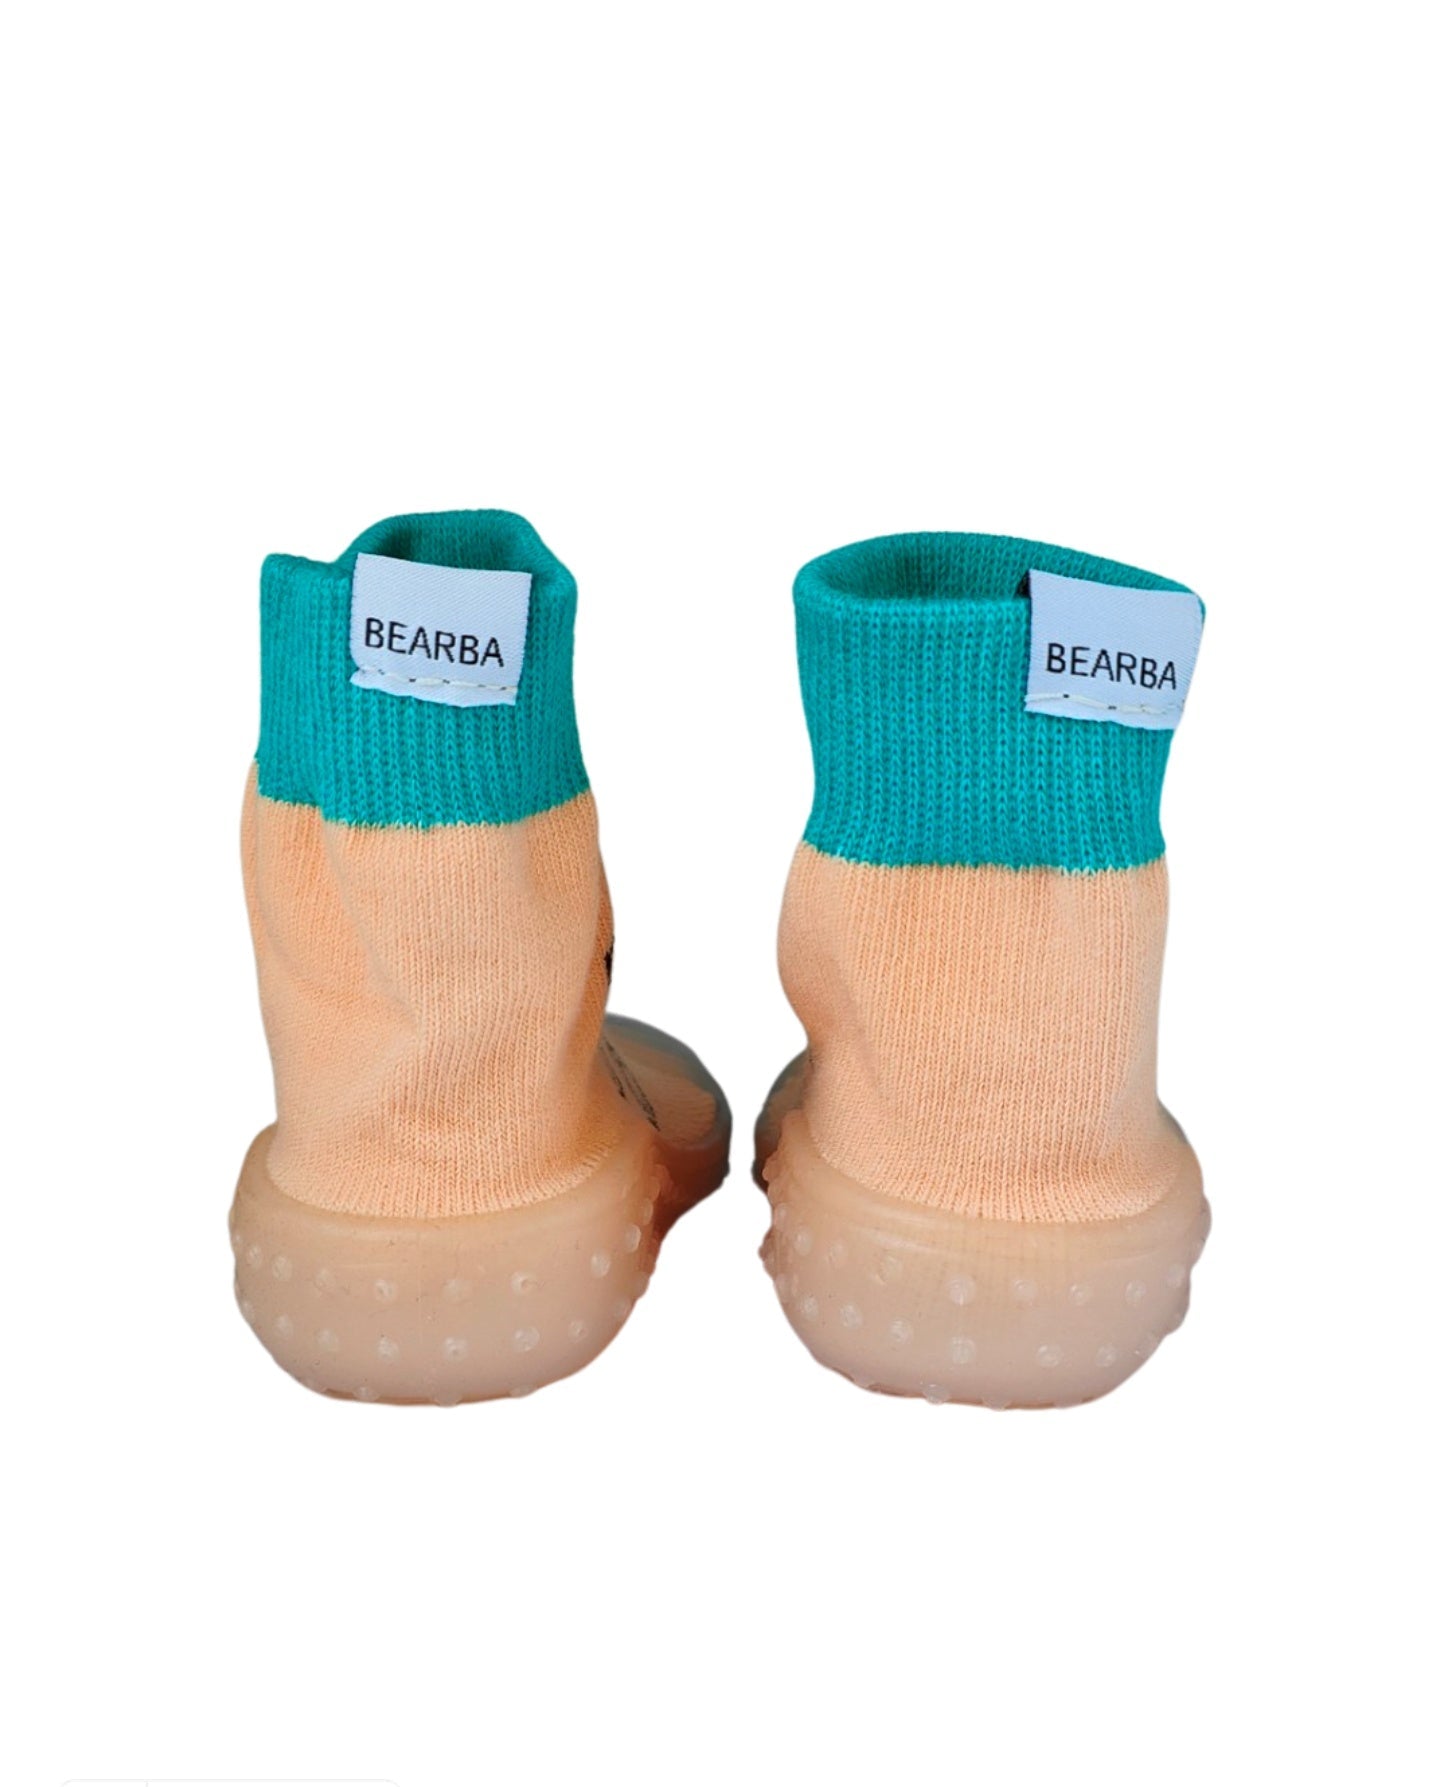 Guess Who Sherbet by Bearba-Sock Shoes for Babies & Toddlers Sizes- XS,S,M- Flexible Soles, Lightweight, Machine Washable - Bearba